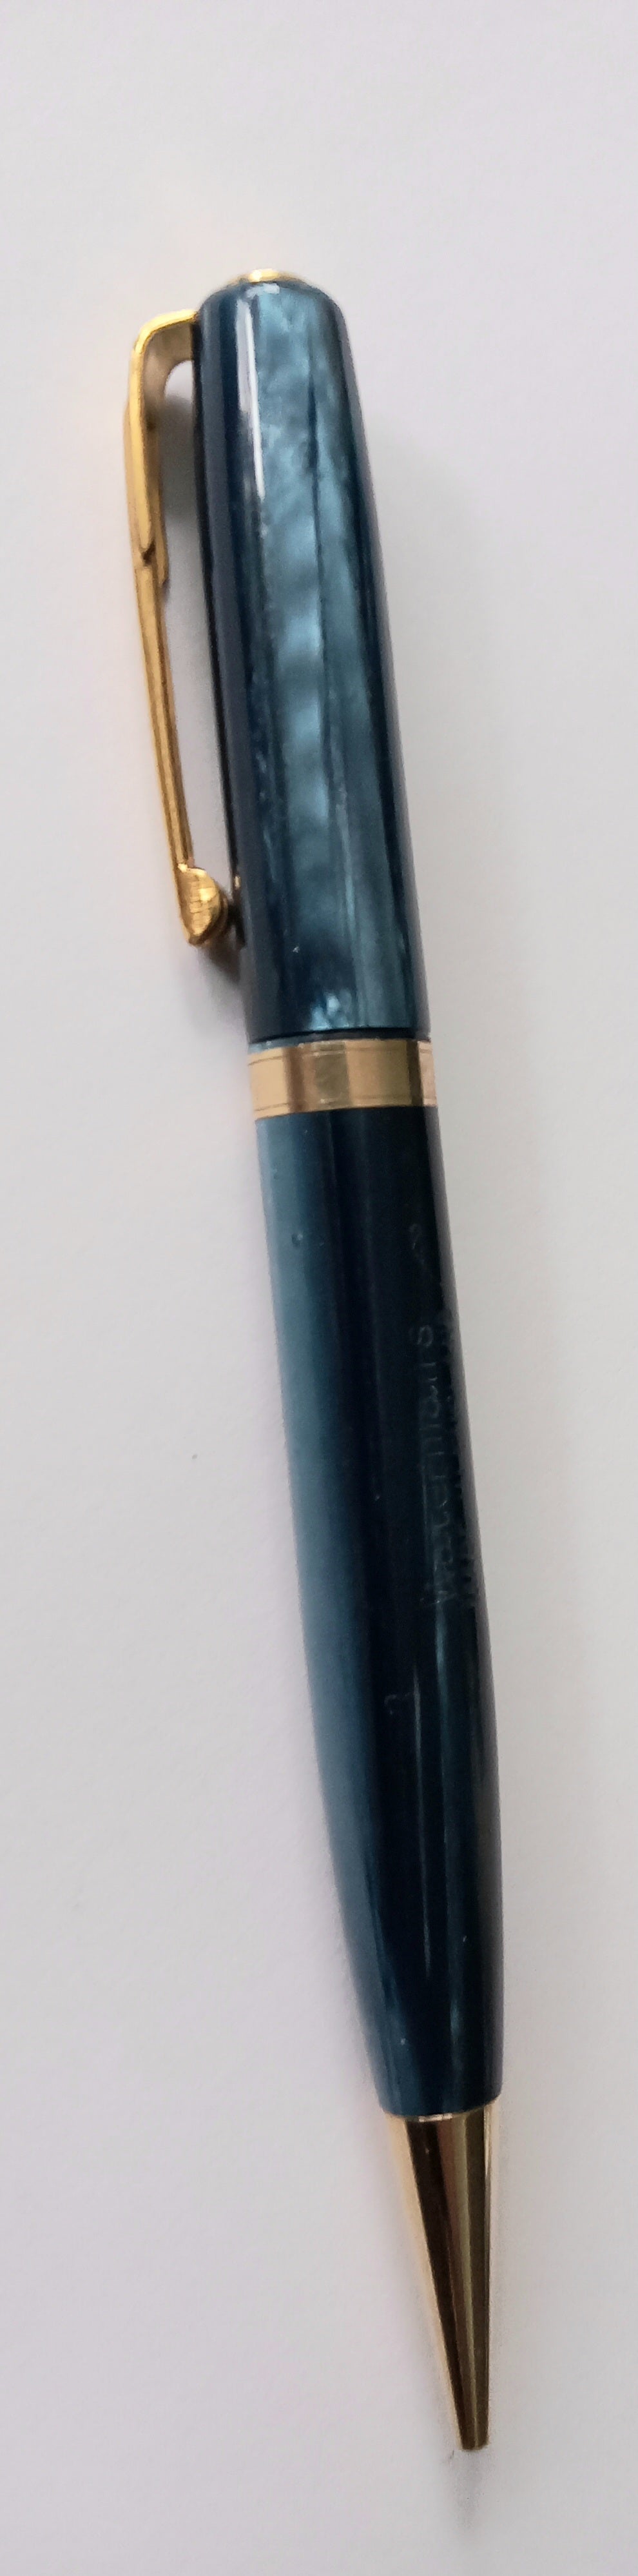 Waterman's Sky blue Ozure Pencil With Gold Plating Trims.